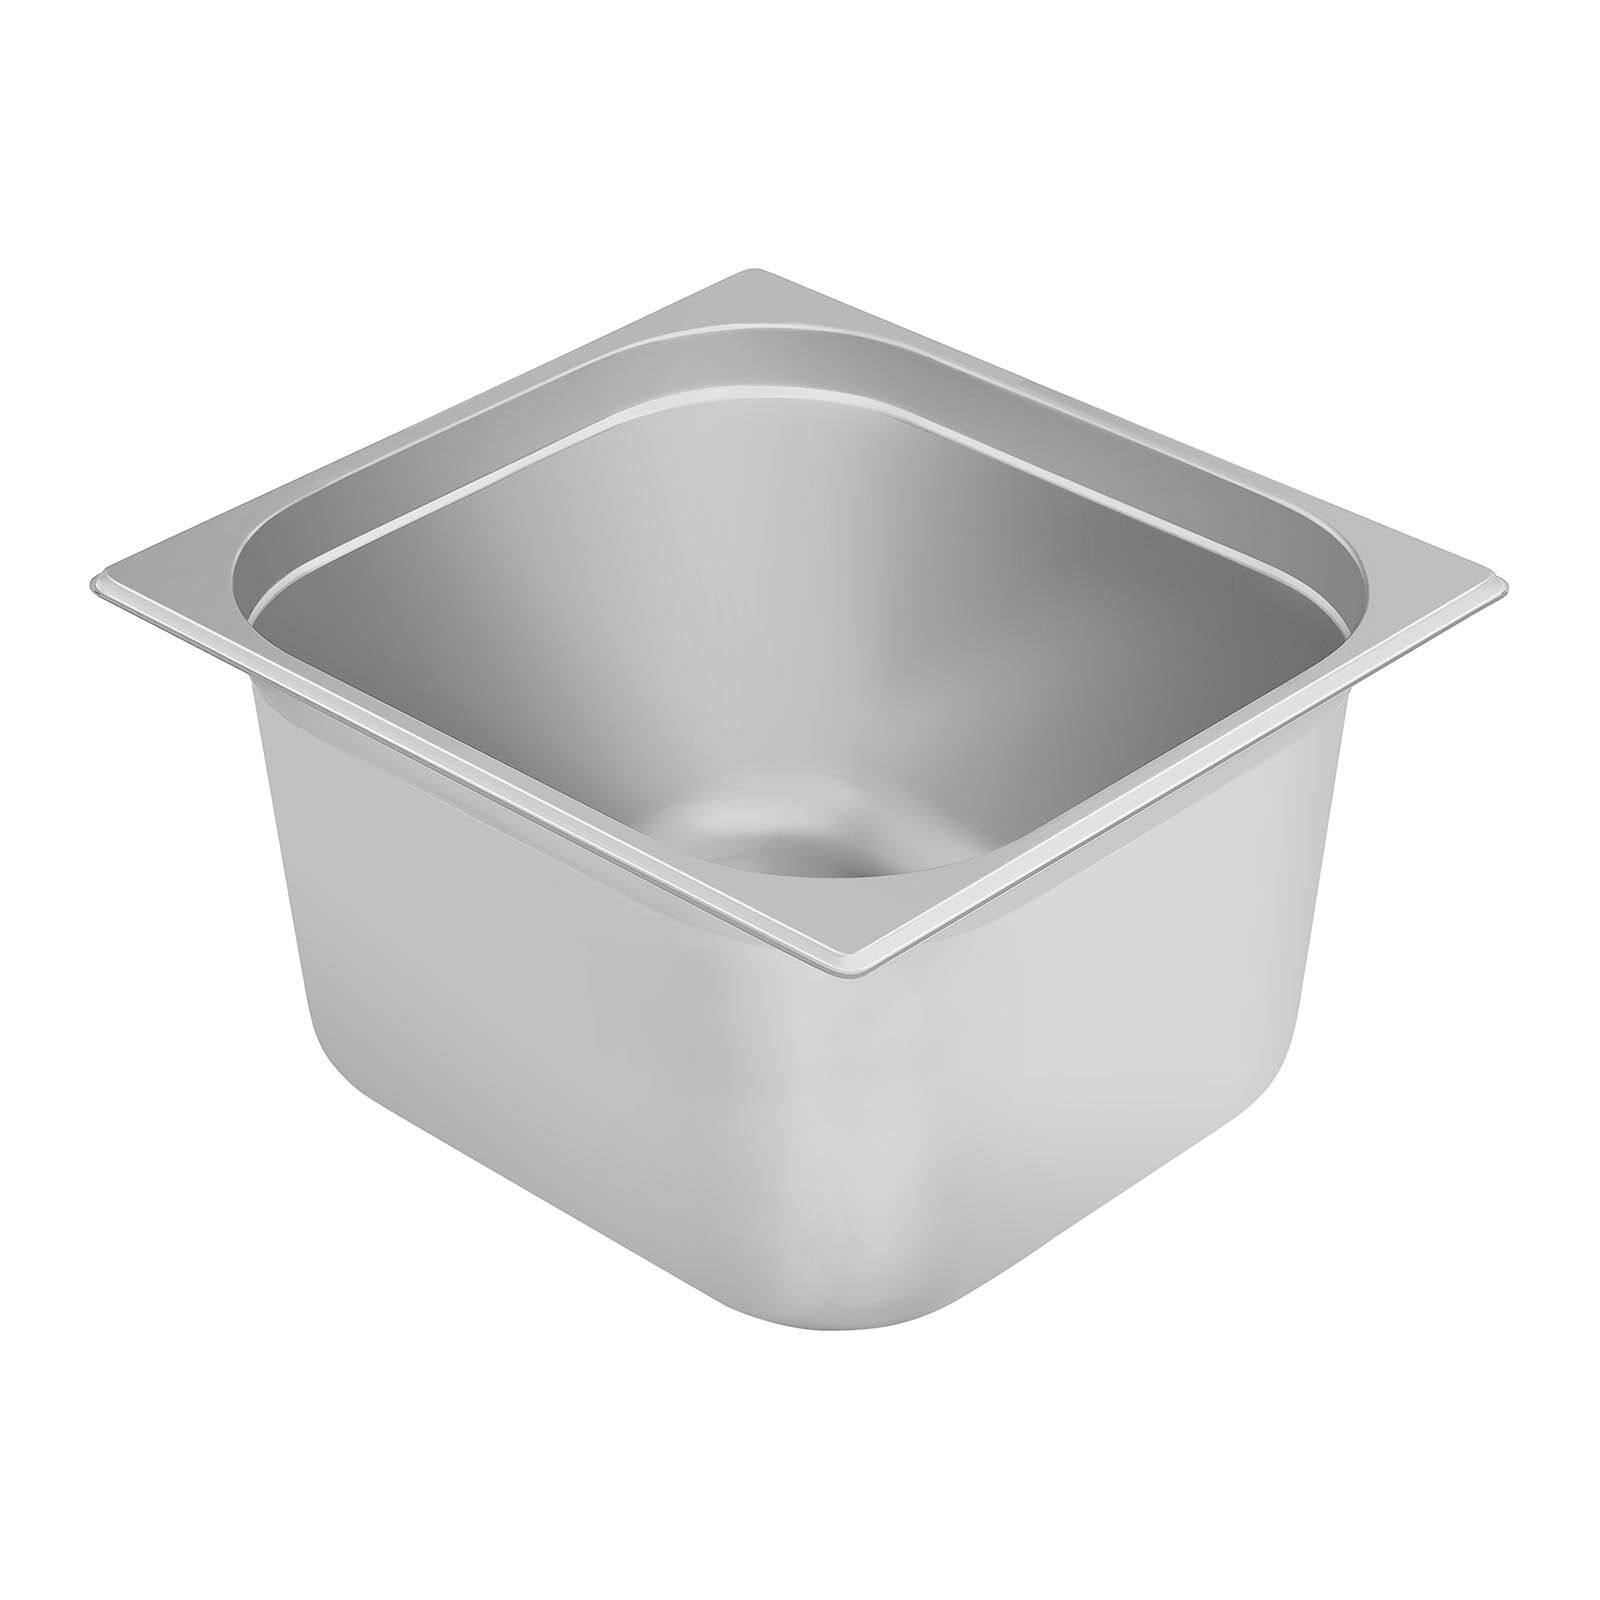 Royal Catering Gastronorm Tray - 2/3 - 200 mm RCGN-2/3X200